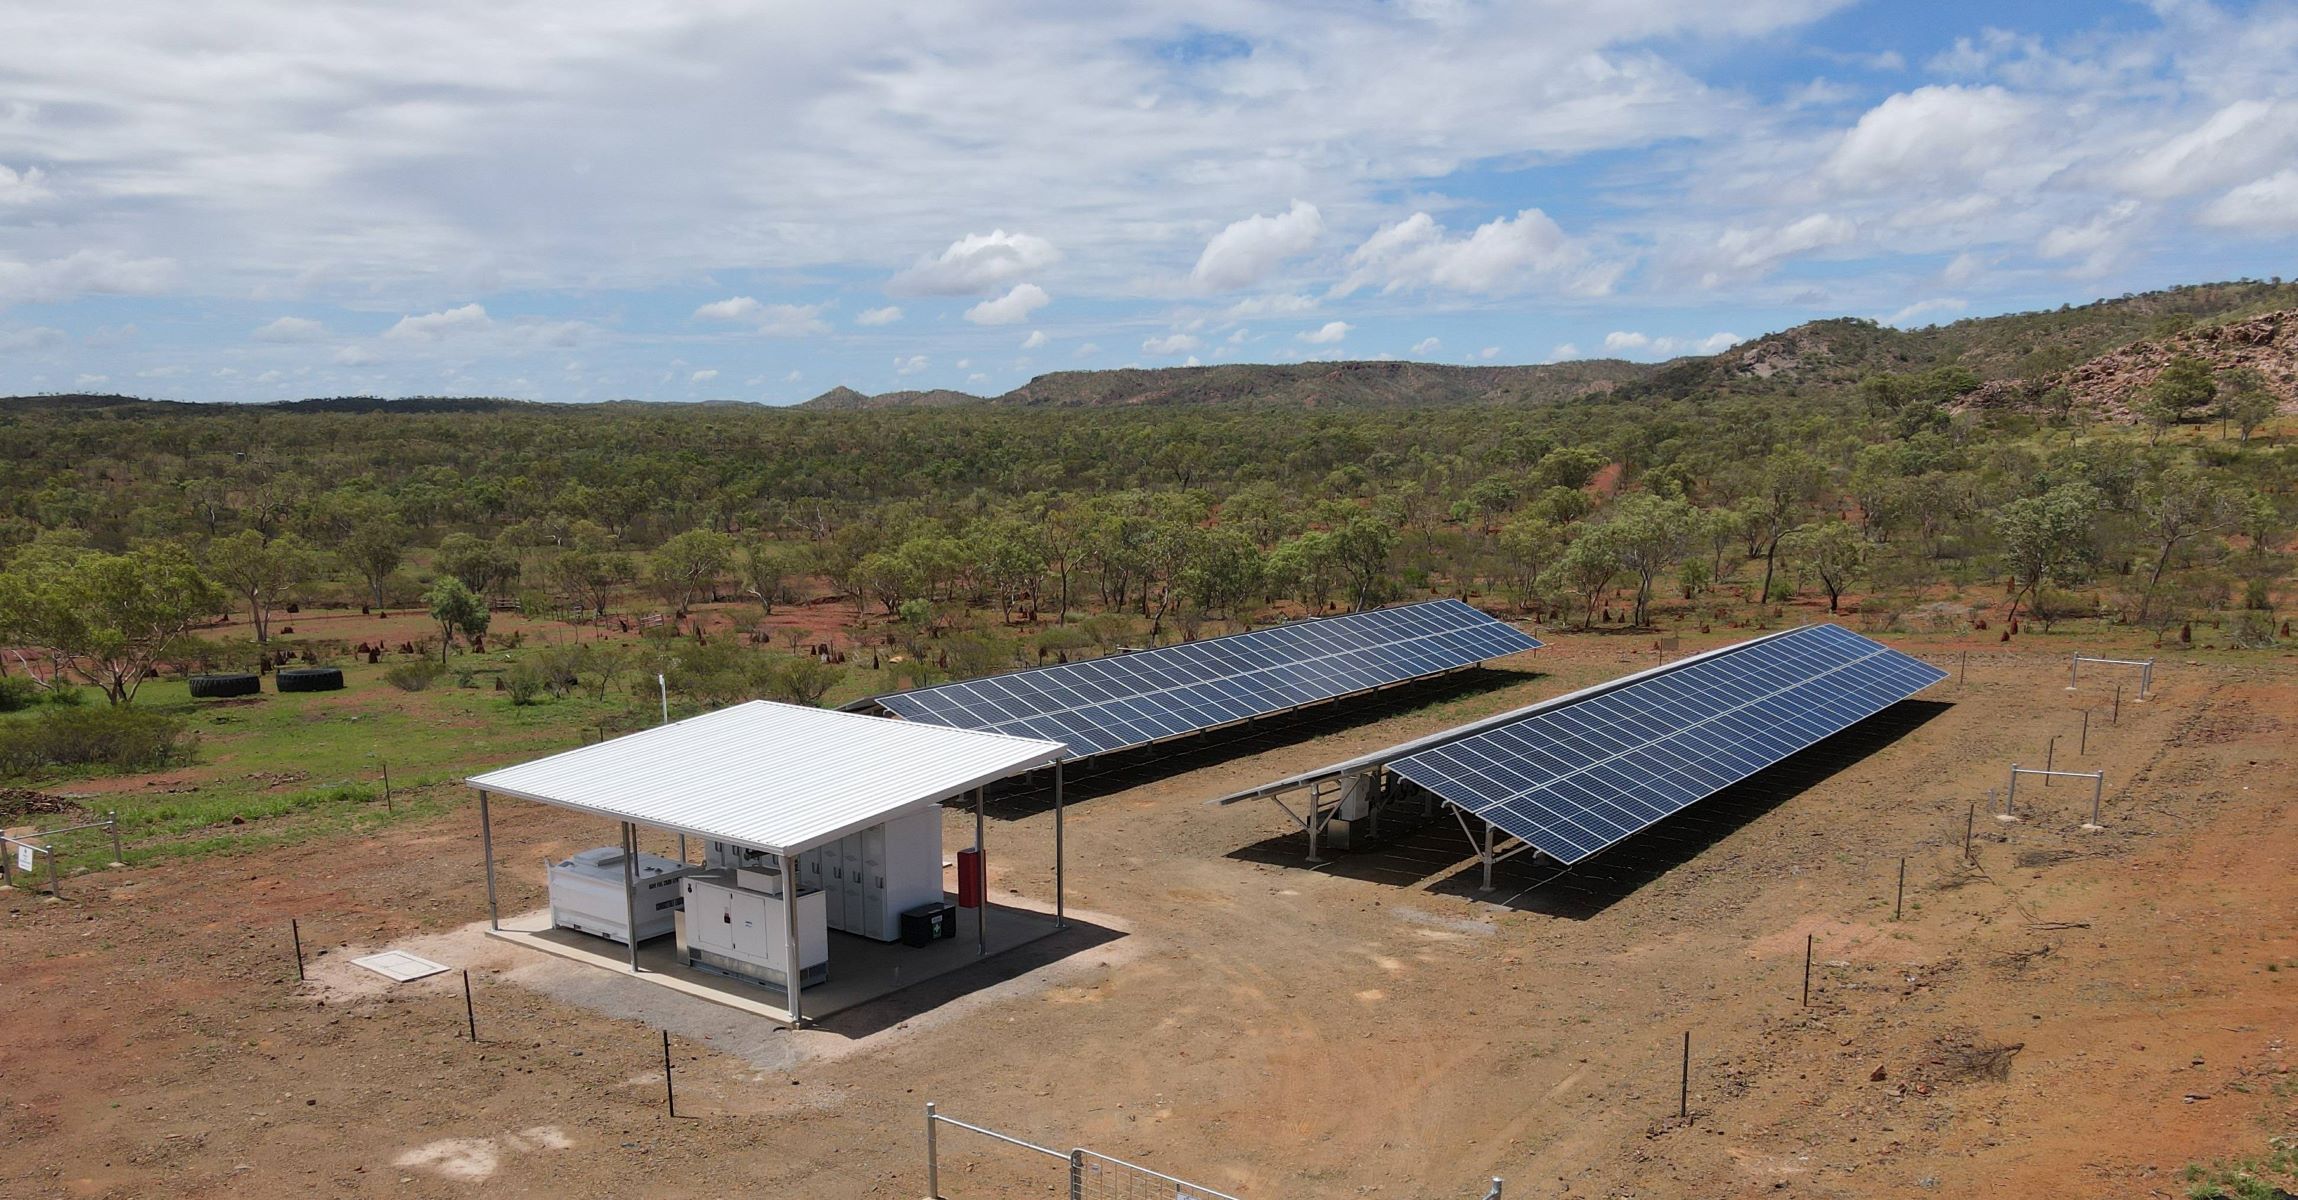 Stand alone power station showing solar panels